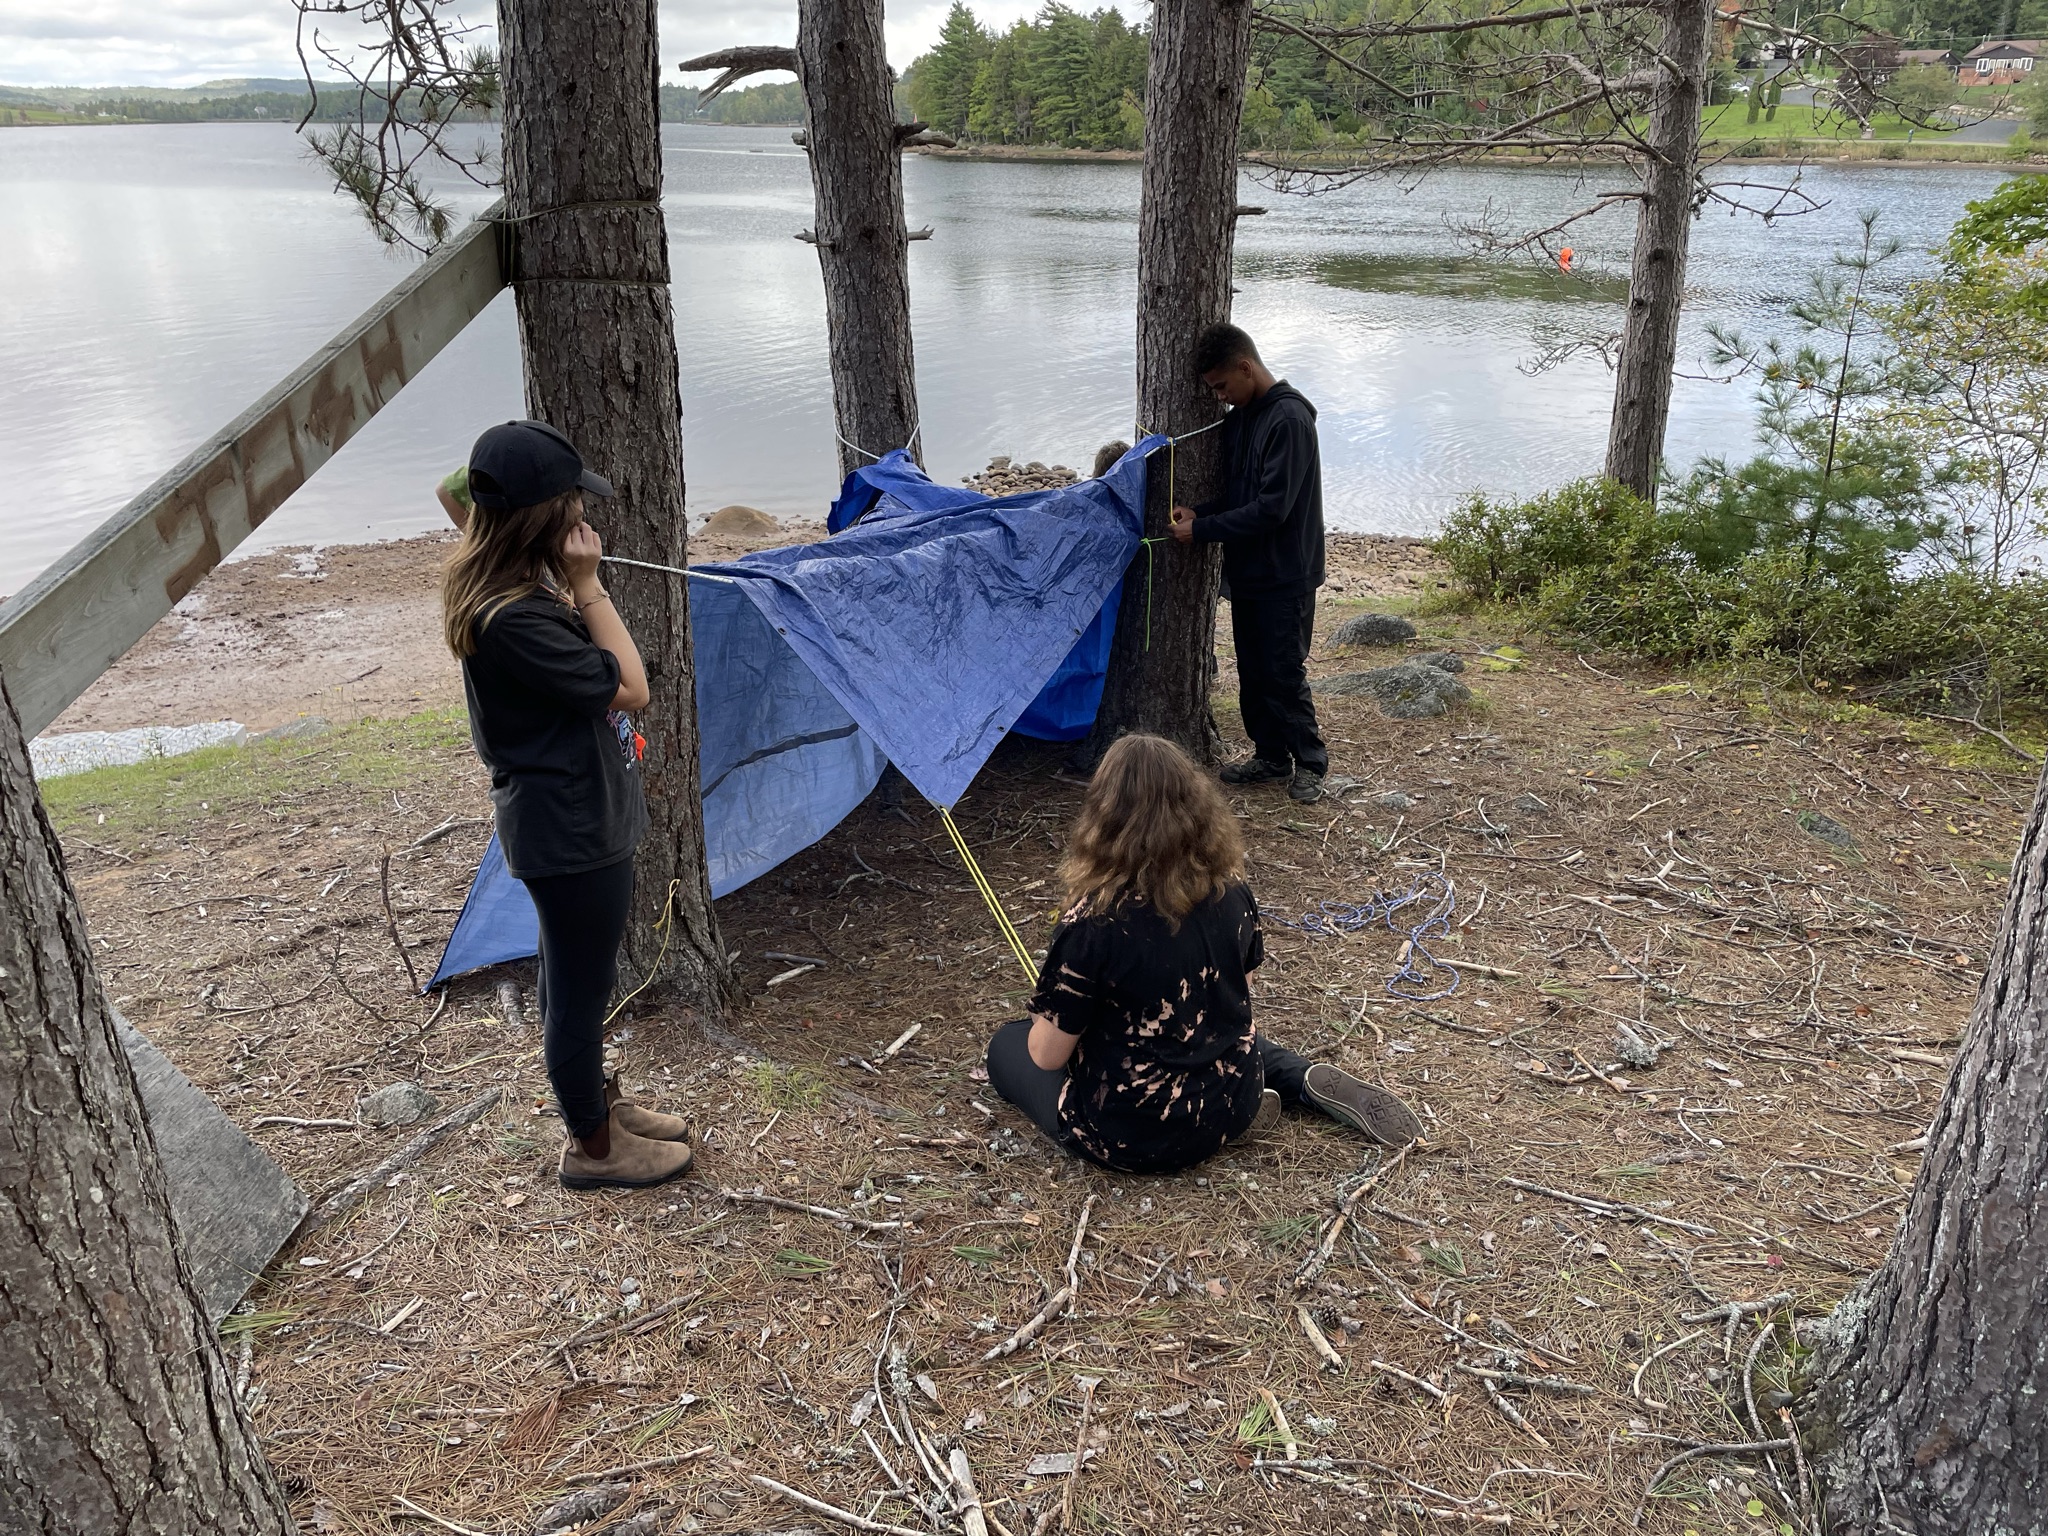 People are building a shelter with a tarp in the woods